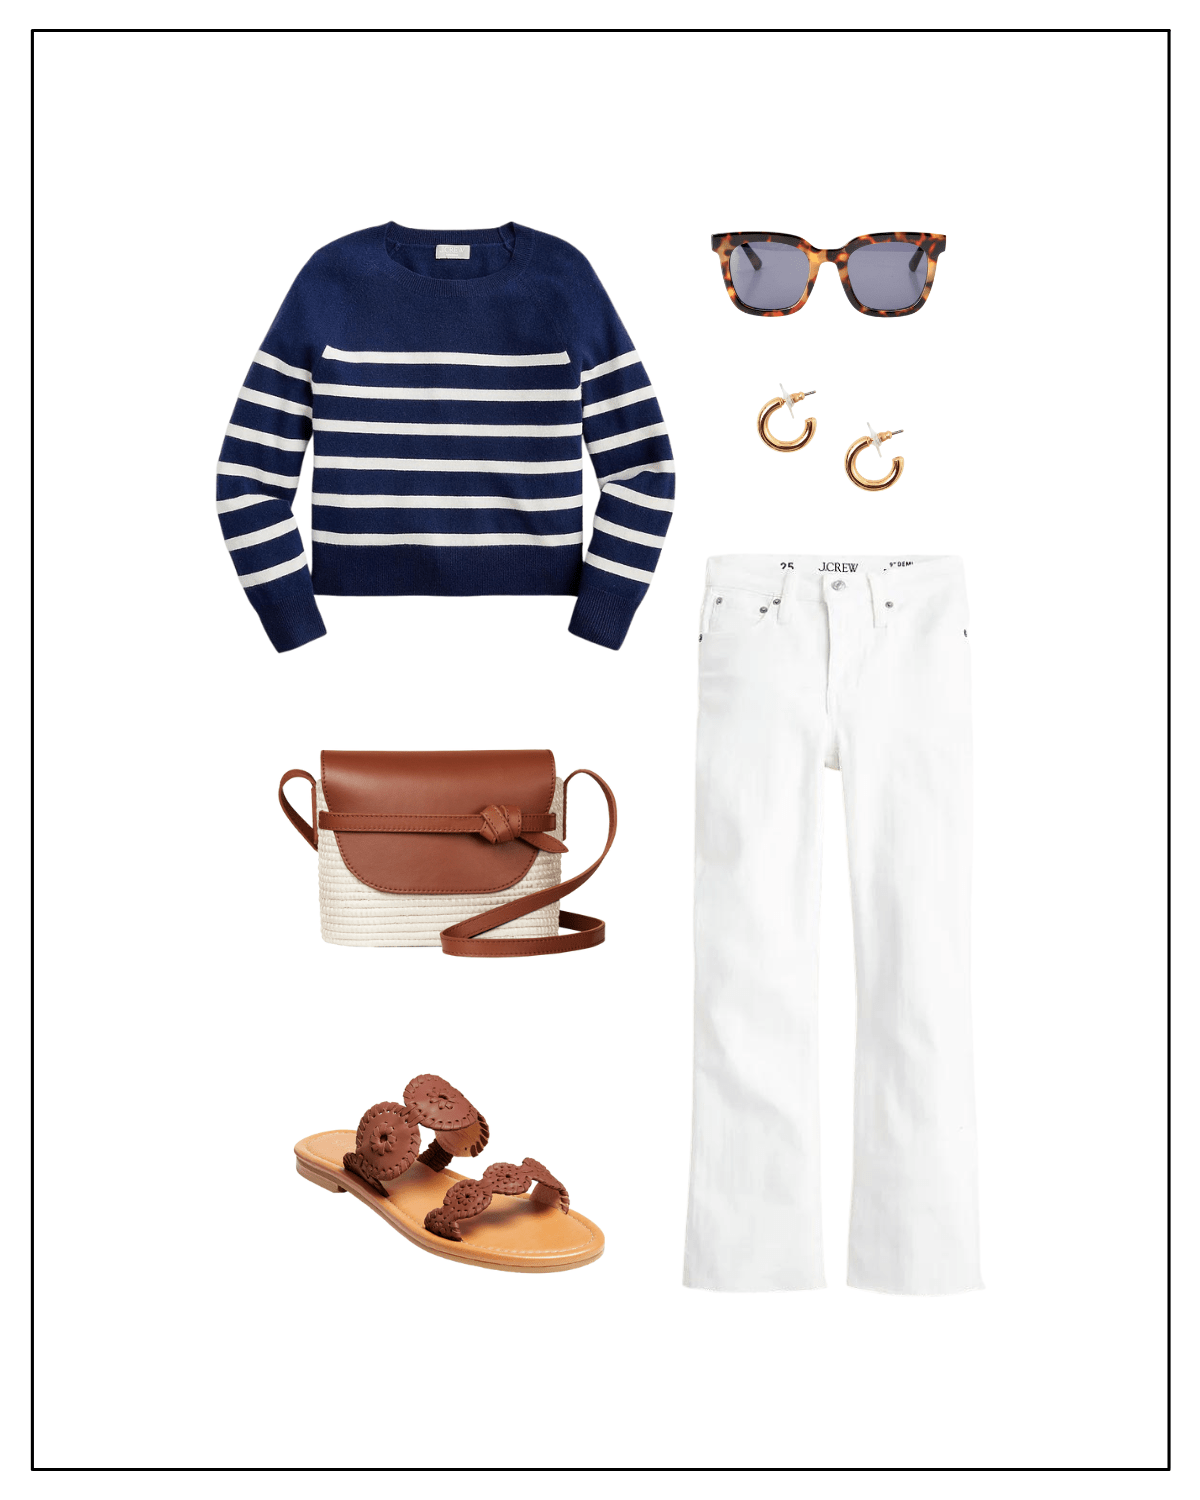 Striped Sweater Spring Break Outfit Ideas